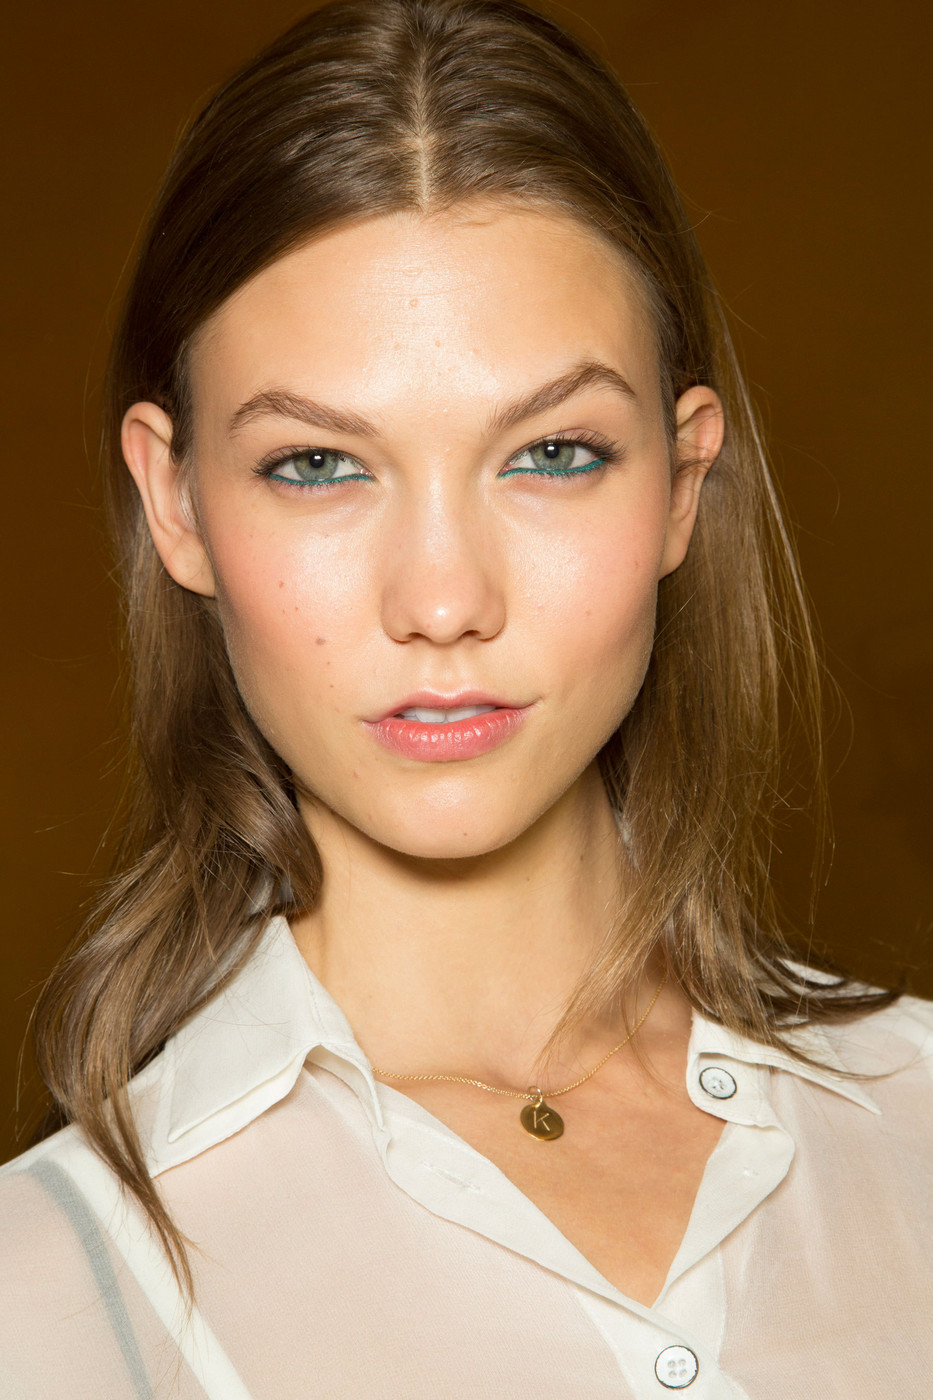 Karlie Kloss Pictures